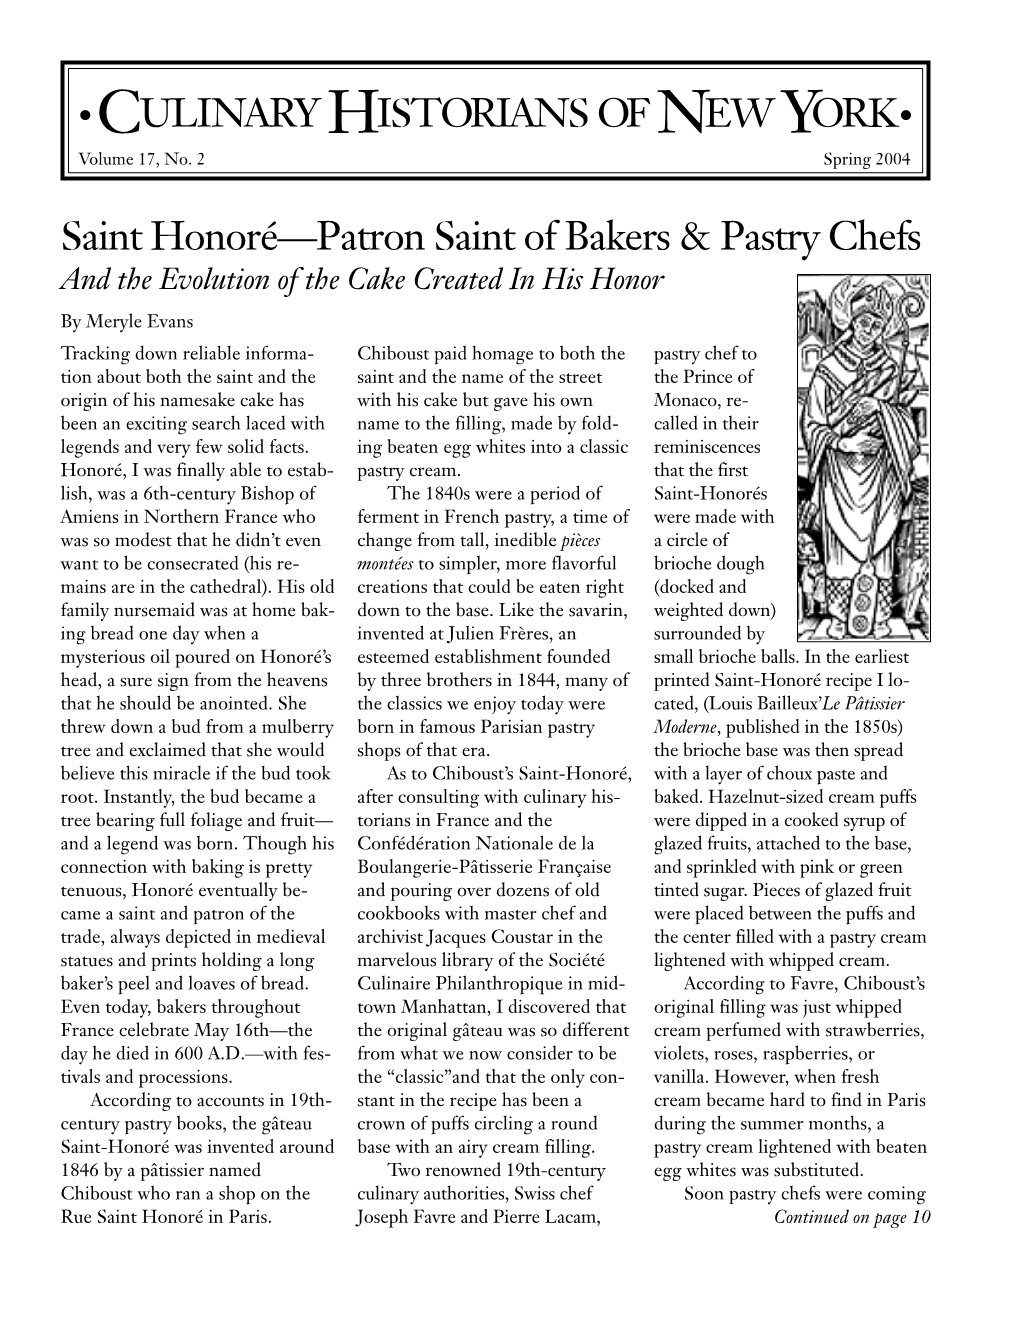 CULINARY HISTORIANS of NEW YORK• Saint Honoré—Patron Saint of Bakers & Pastry Chefs